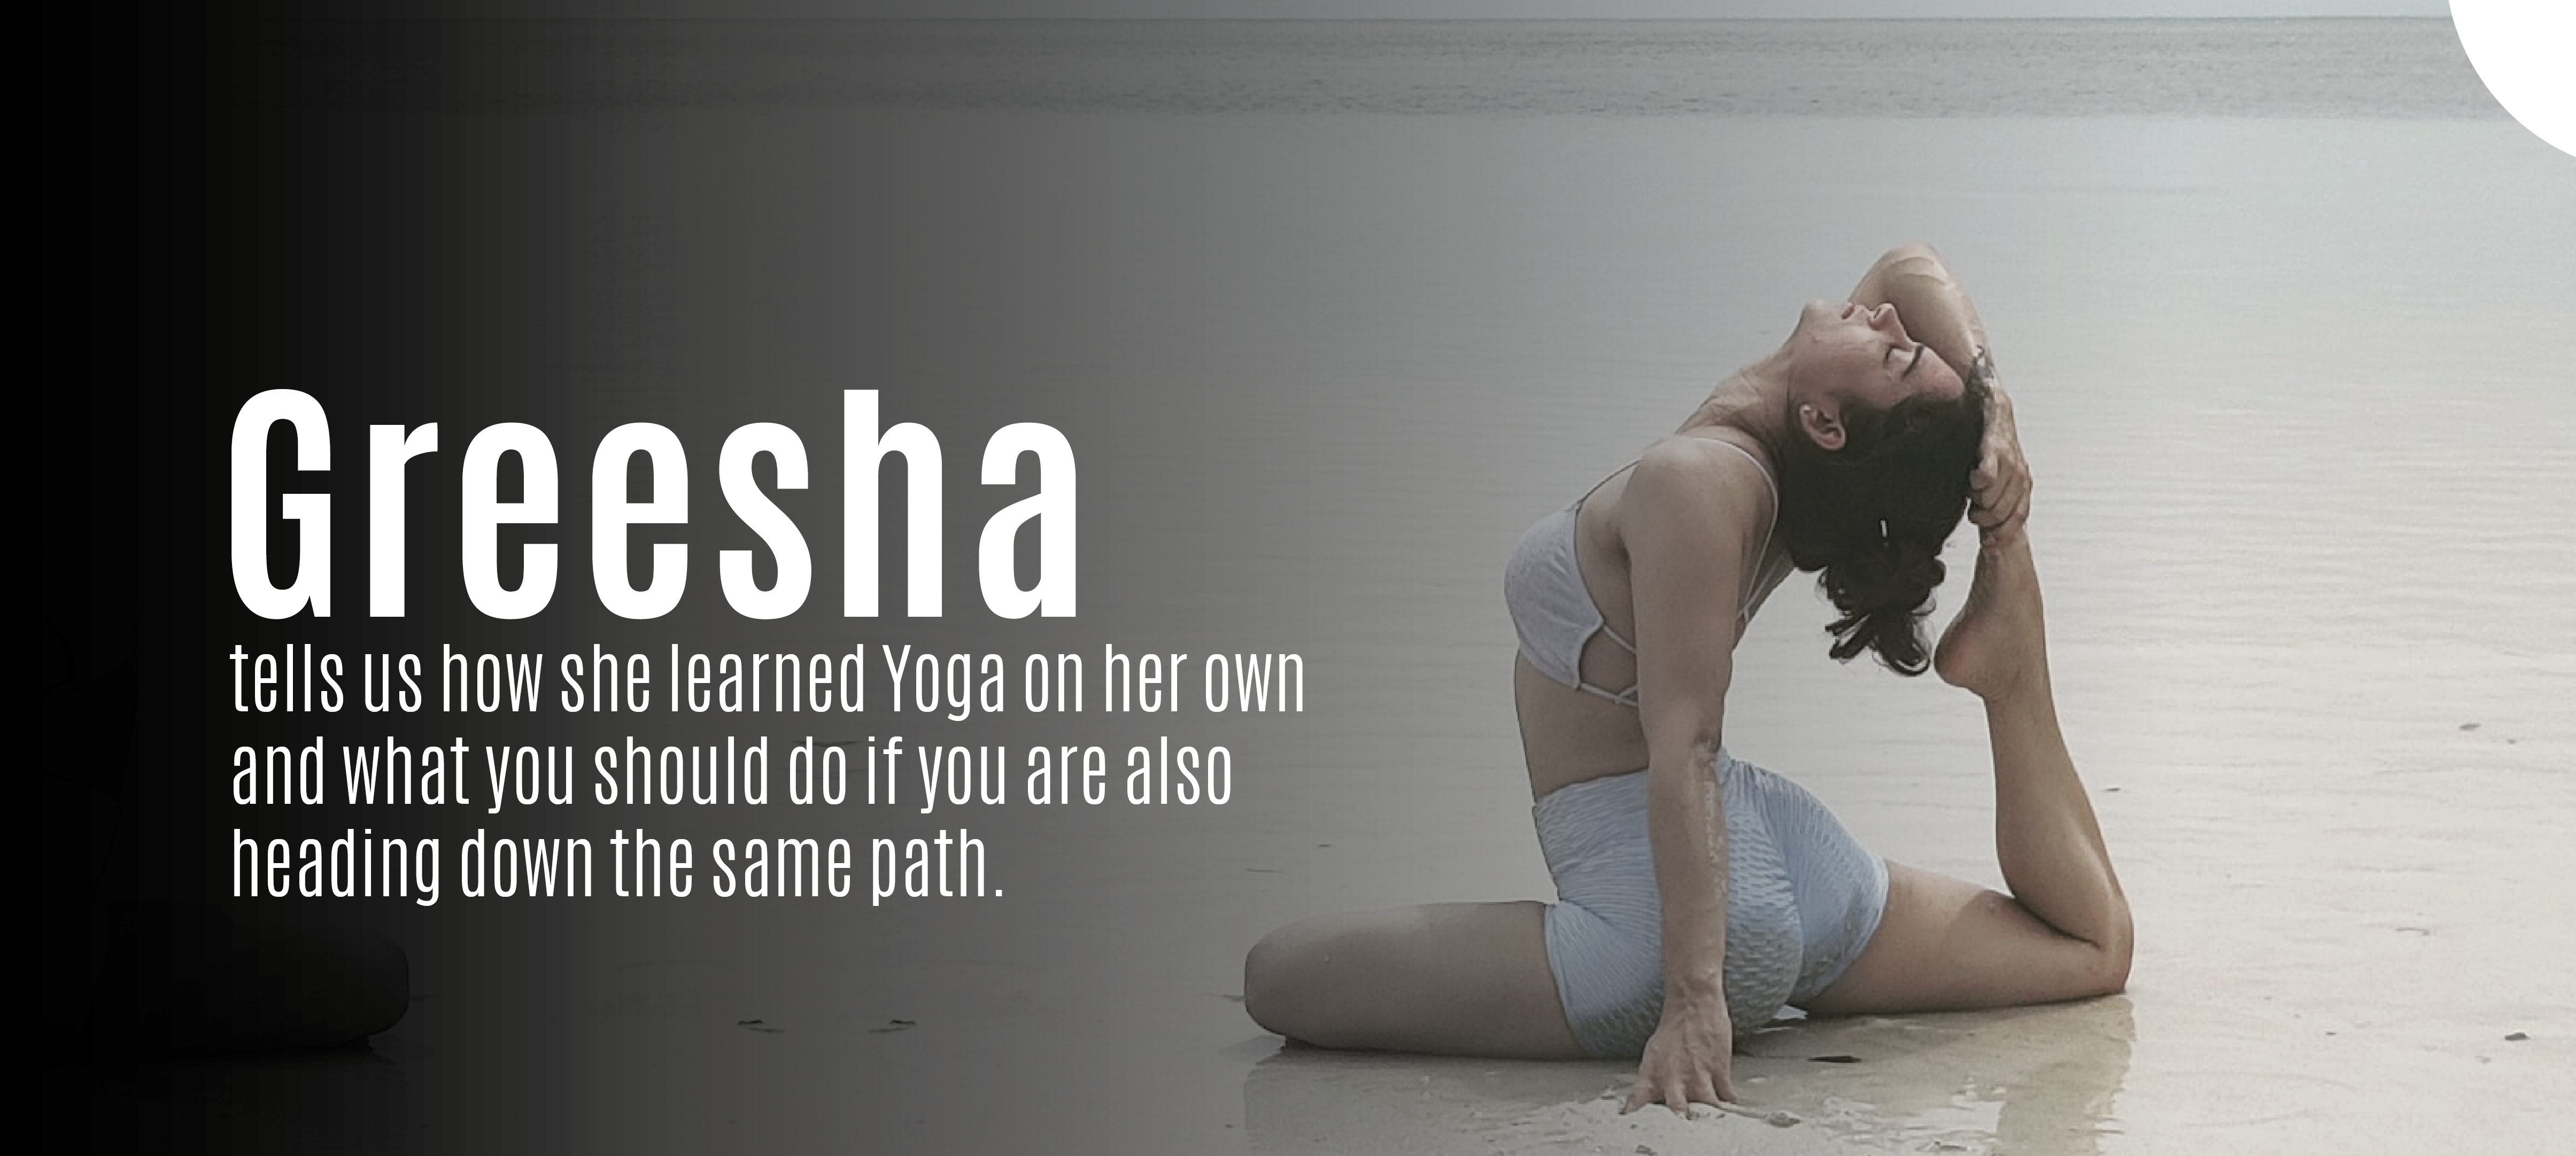 Lessons to start your Yoga journey from Greesha.